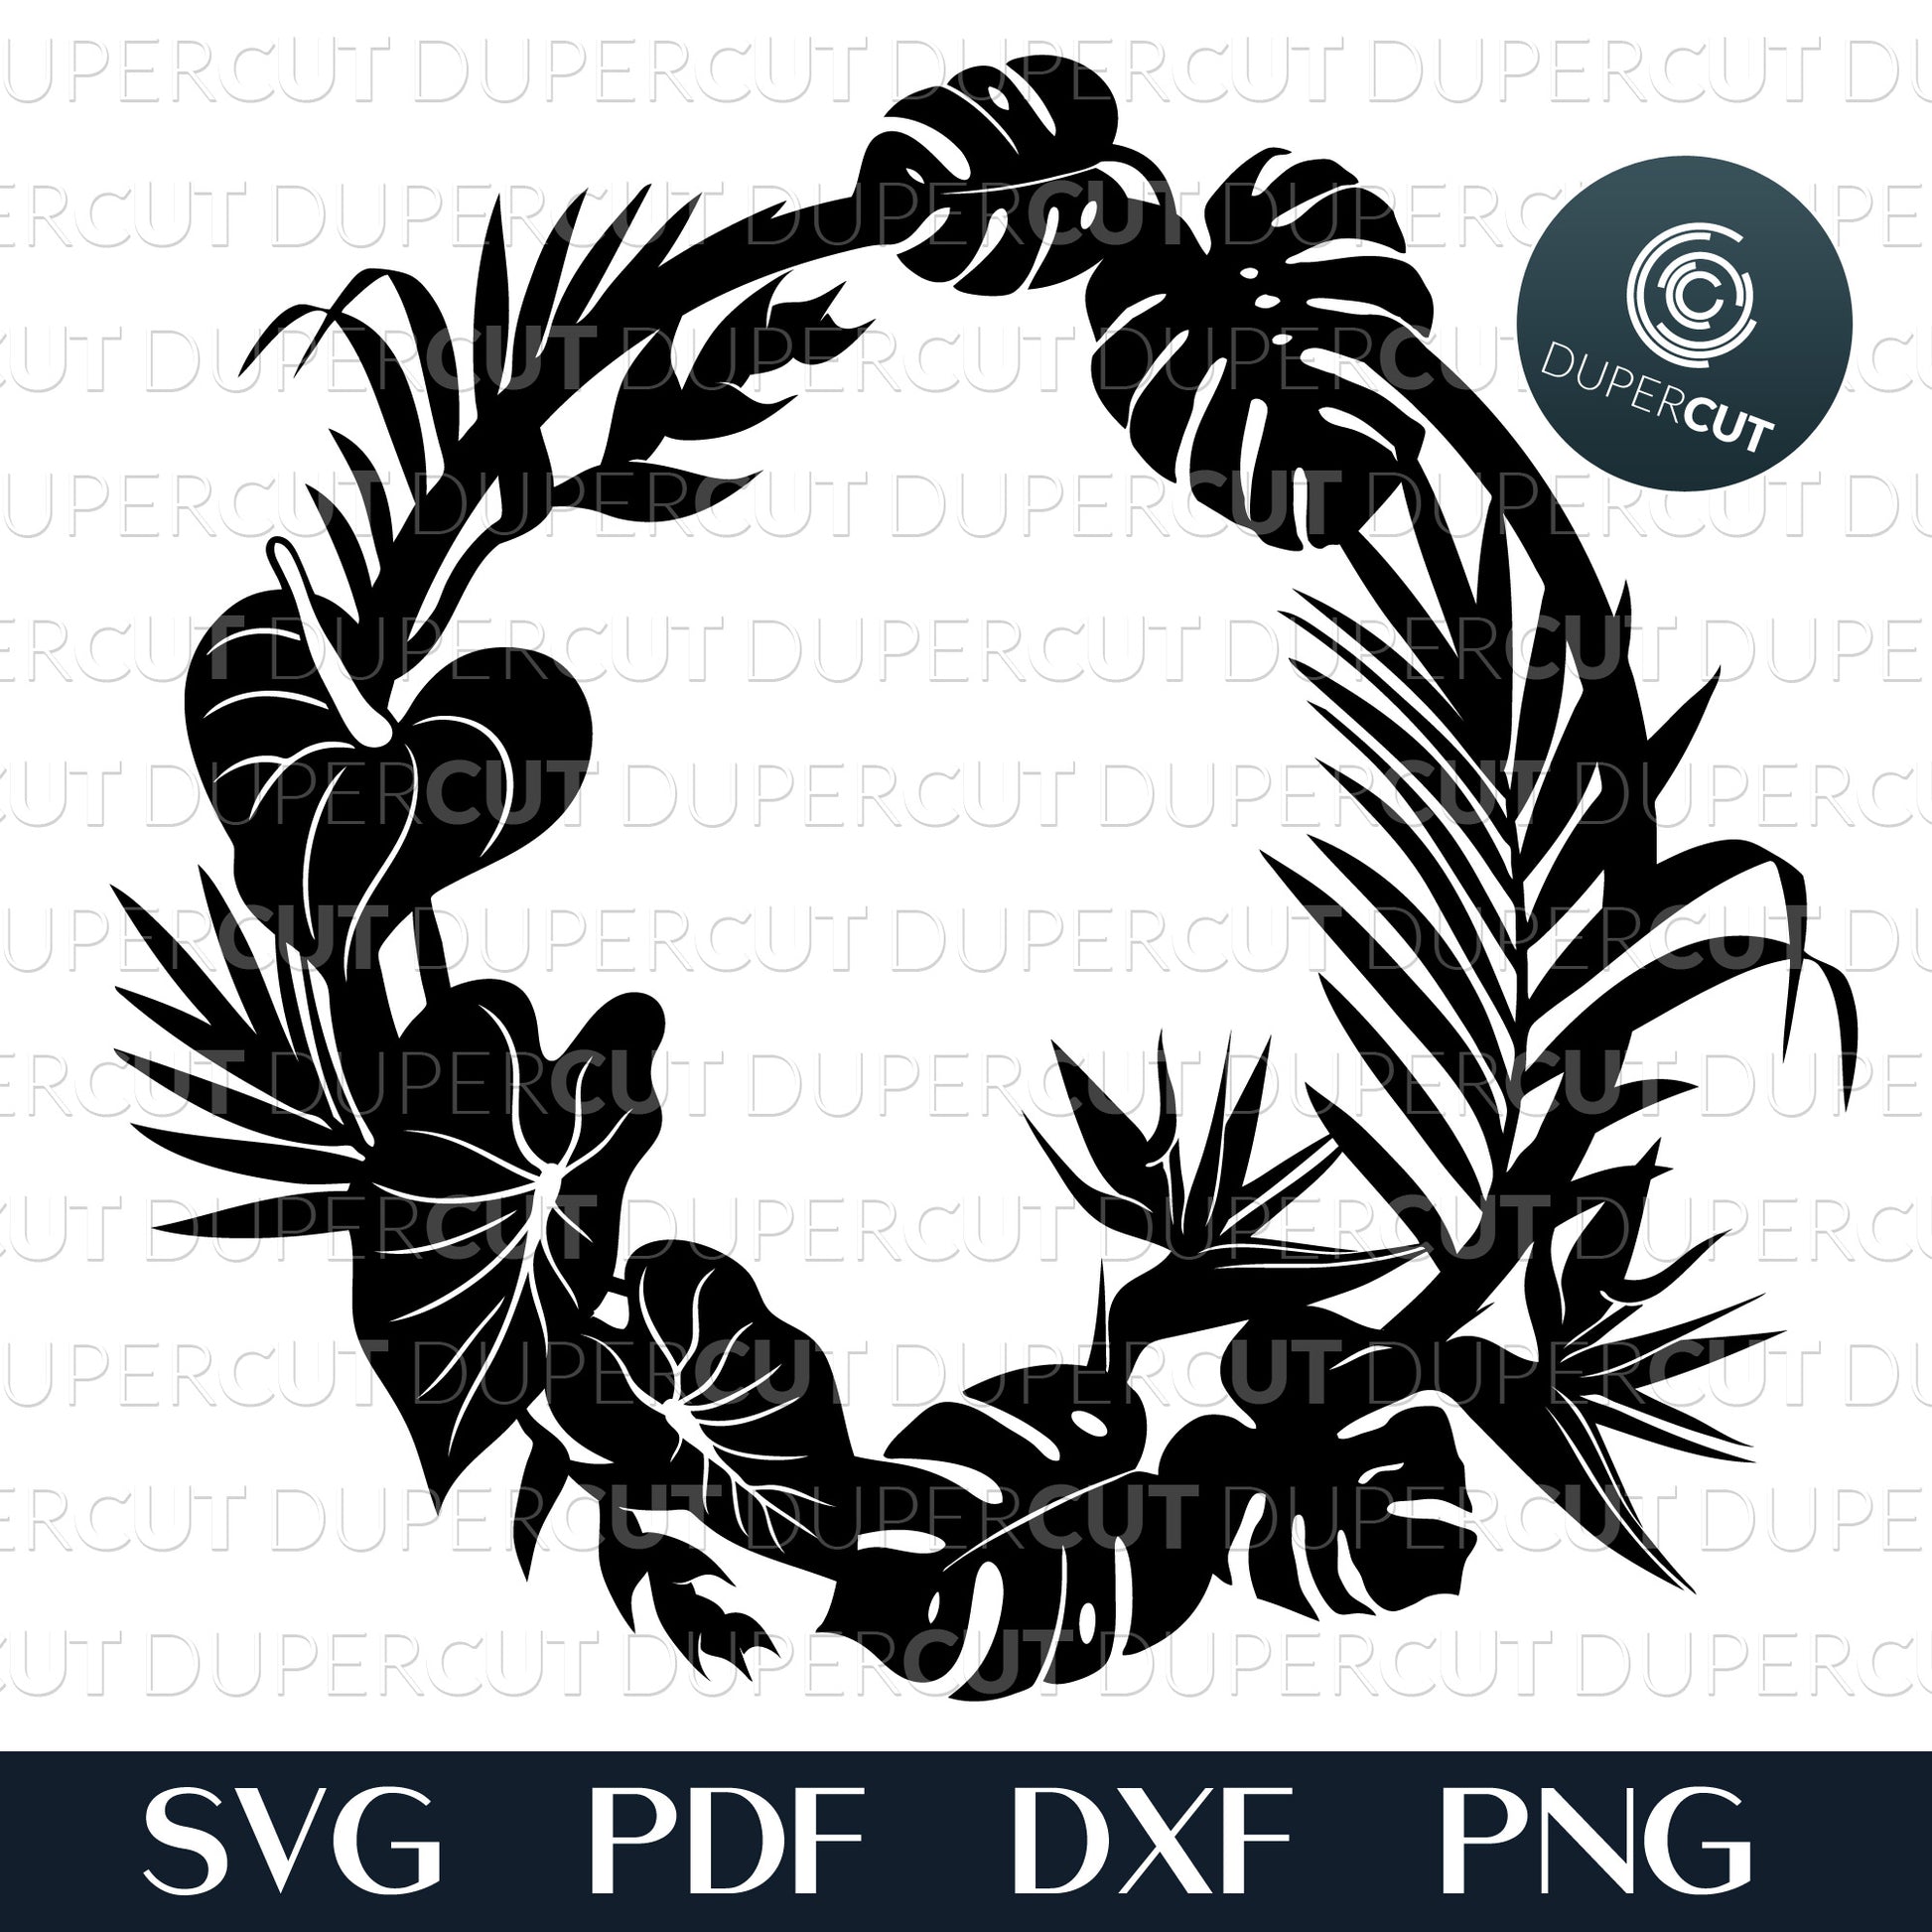 Tropical wreath, bird of paradise, palm leaves silhouette. SVG PNG DXF cutting files for Cricut, Glowforge, Silhouette cameo, laser engraving